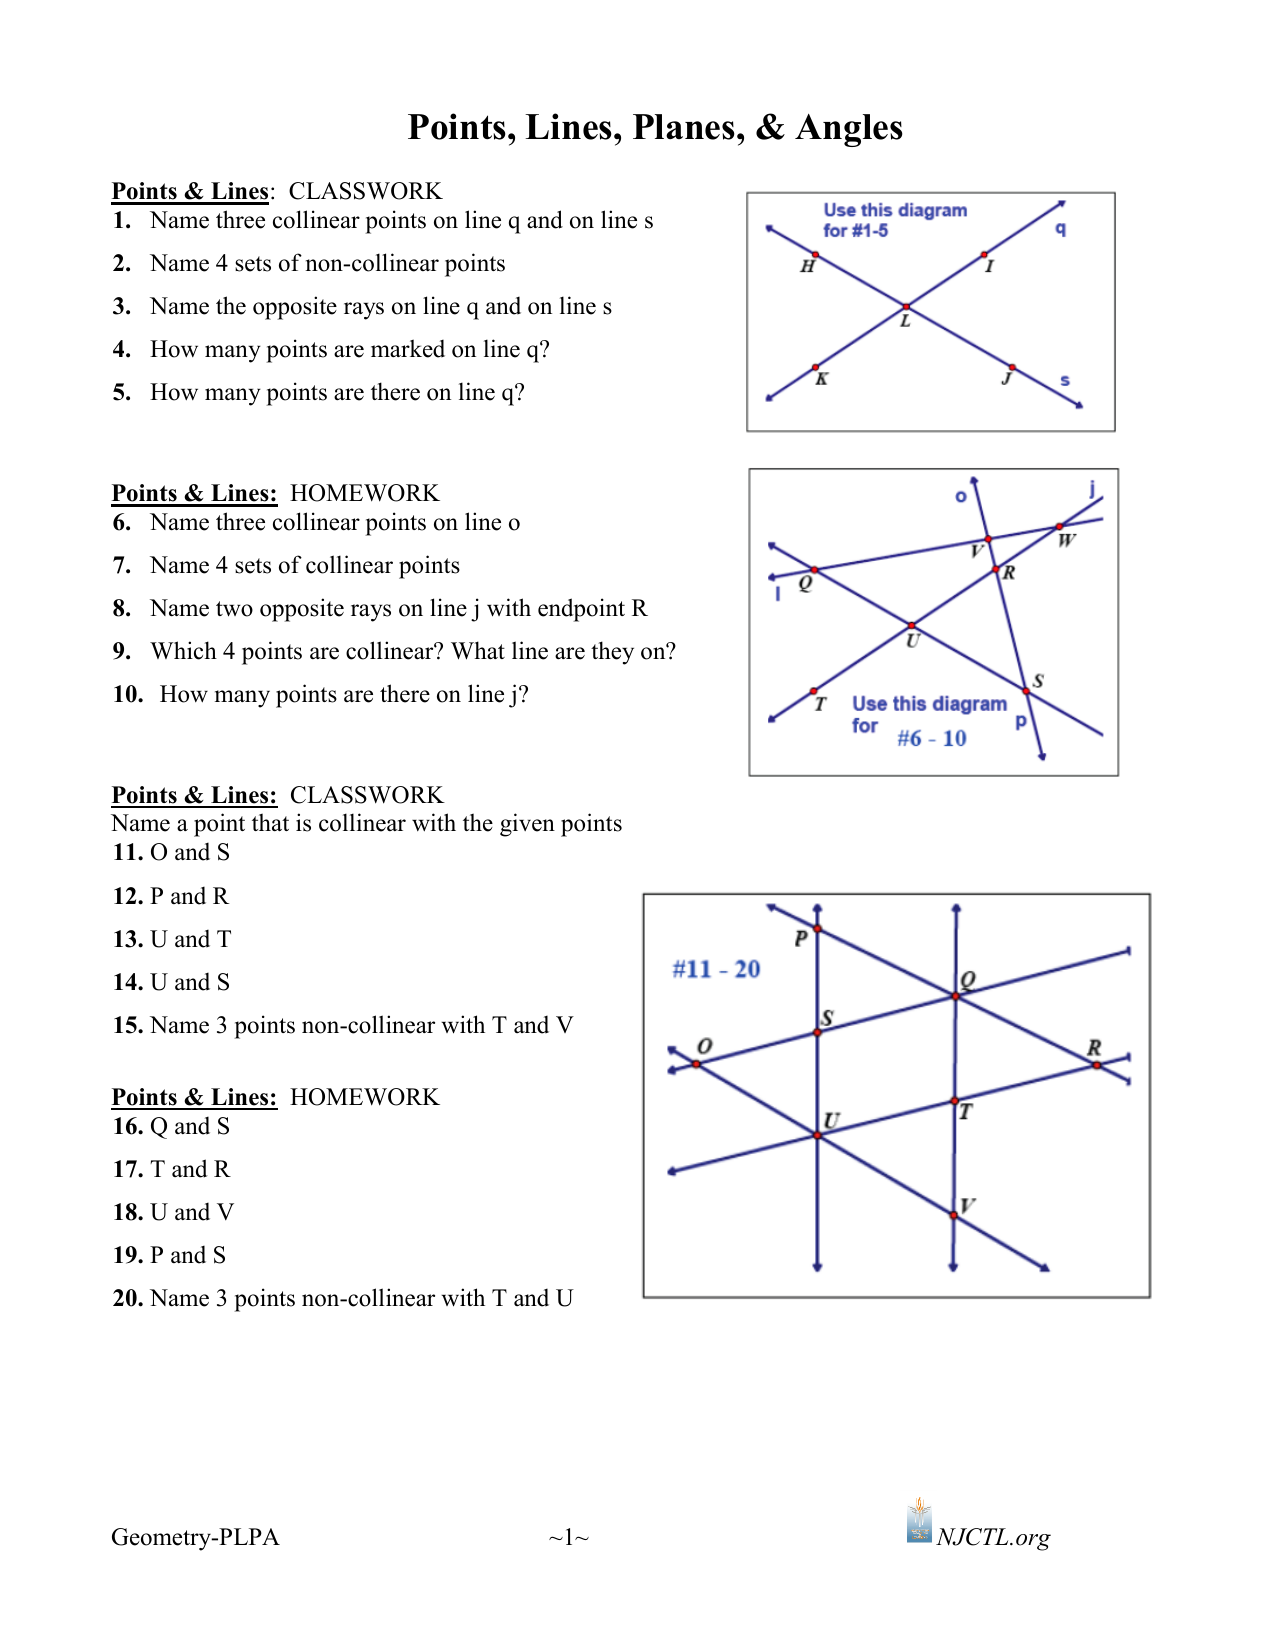 points-lines-planes-and-angles-cw-hw-review-and-solutions-2014-08-27